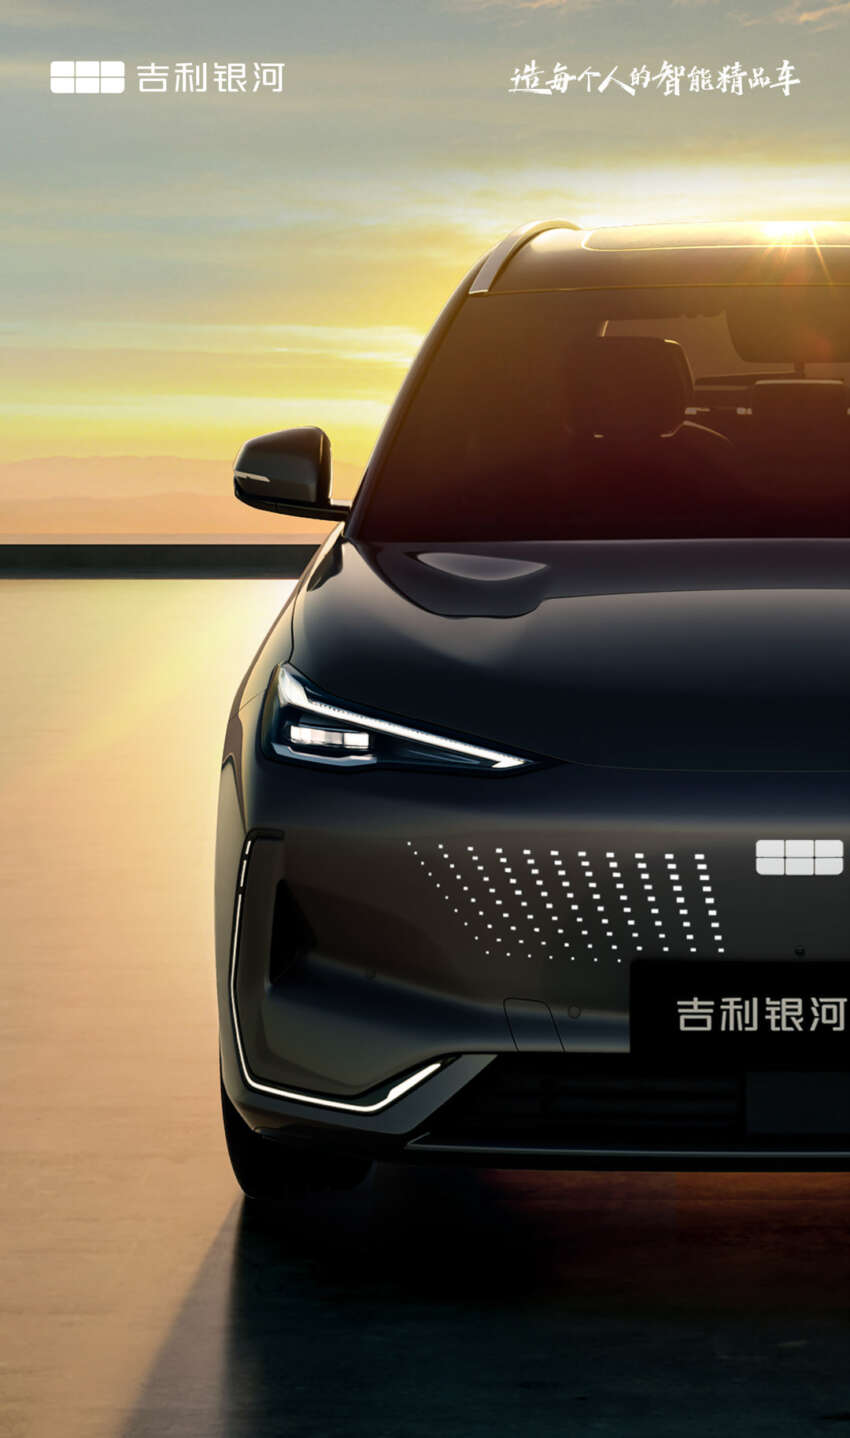 Geely Galaxy E5 revealed in China – new EV built on GEA; previews Proton’s upcoming EV in 2025? 1760750